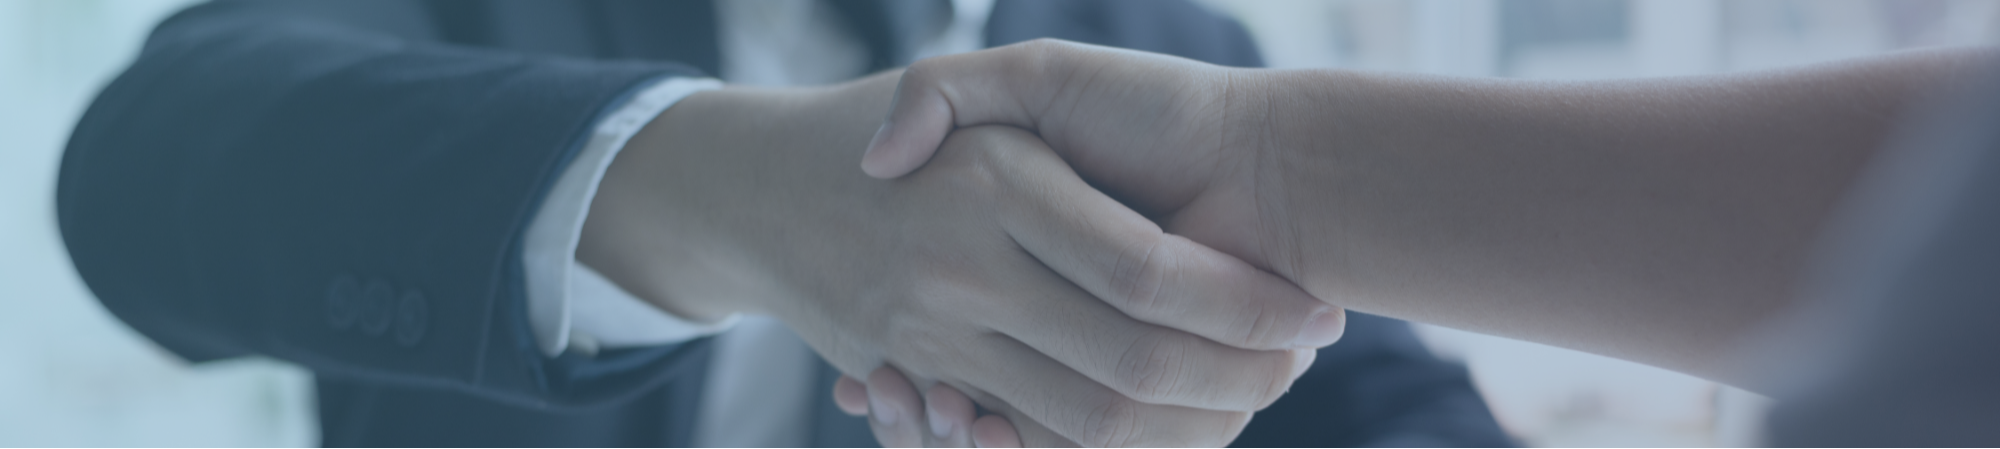 Candour Talent Recruitment Agency - Partner with us Page. Main banner of a handshake in a professional working environment, symbolizing our commitment to forging strong partnerships and collaborations.